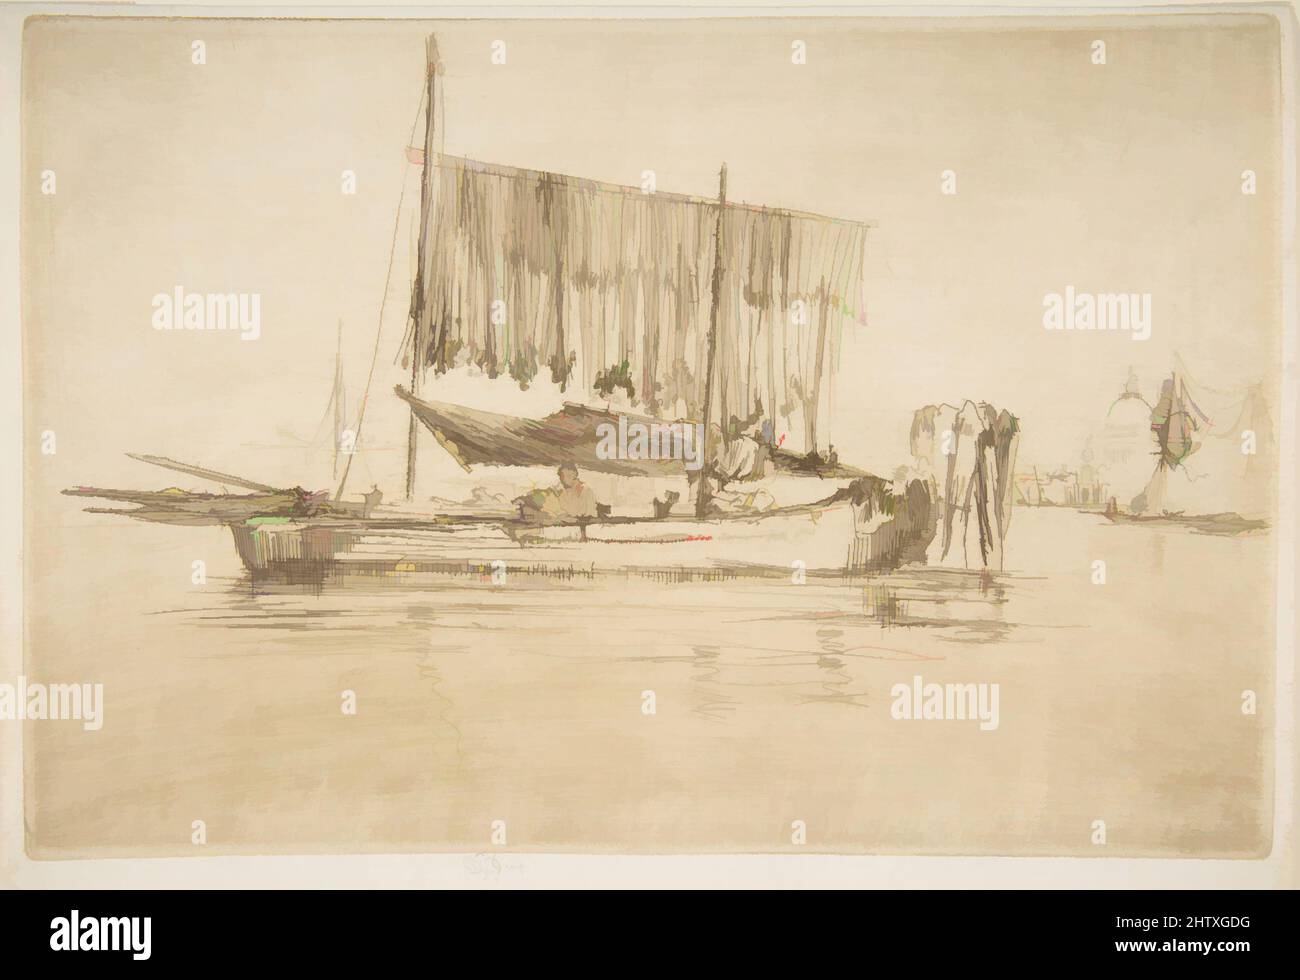 Art inspired by Fishing Boat, 1879–80, Etching and drypoint; fourth state of six (Glasgow); printed in dark brown ink on ivory laid paper, Plate: 6 1/8 × 9 1/8 in. (15.6 × 23.1 cm), Prints, James McNeill Whistler (American, Lowell, Massachusetts 1834–1903 London, Classic works modernized by Artotop with a splash of modernity. Shapes, color and value, eye-catching visual impact on art. Emotions through freedom of artworks in a contemporary way. A timeless message pursuing a wildly creative new direction. Artists turning to the digital medium and creating the Artotop NFT Stock Photo